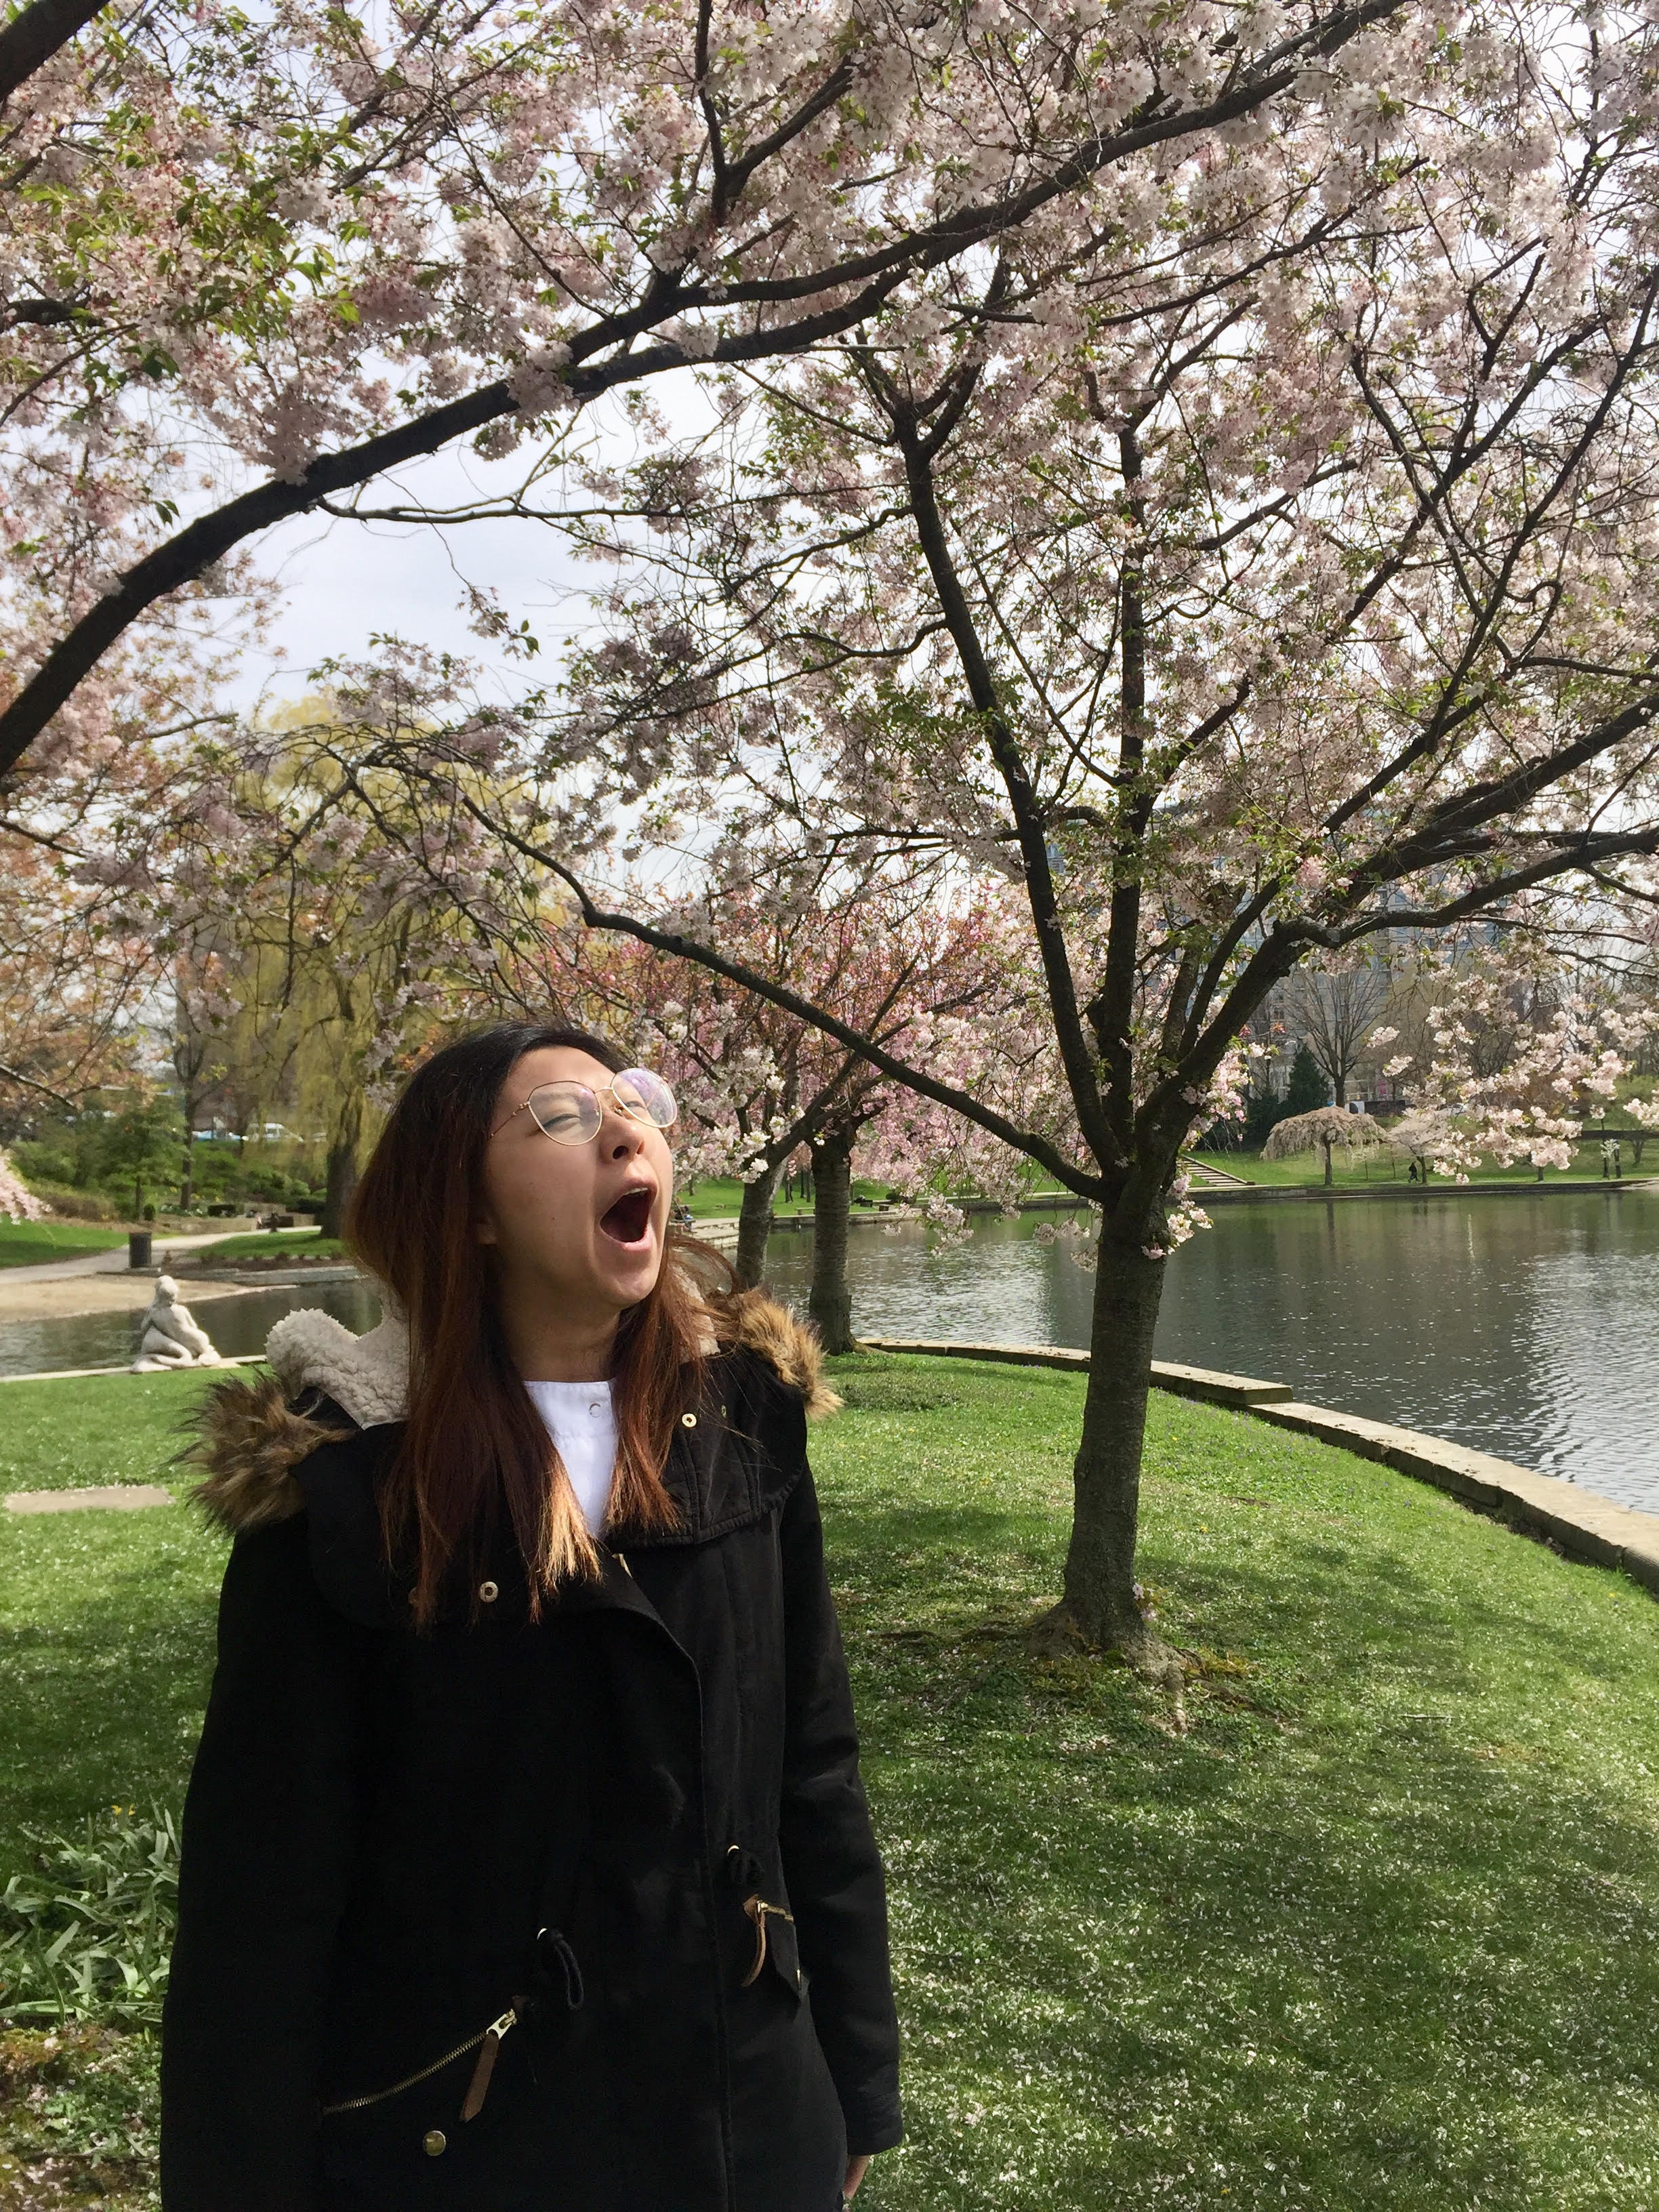 BSN student takes a fresh air break under the cherry blossoms after an 8-hour OR clinical shift with the Frances Payne Bolton School of Nursing at Case Western Reserve University in Cleveland, Ohio.